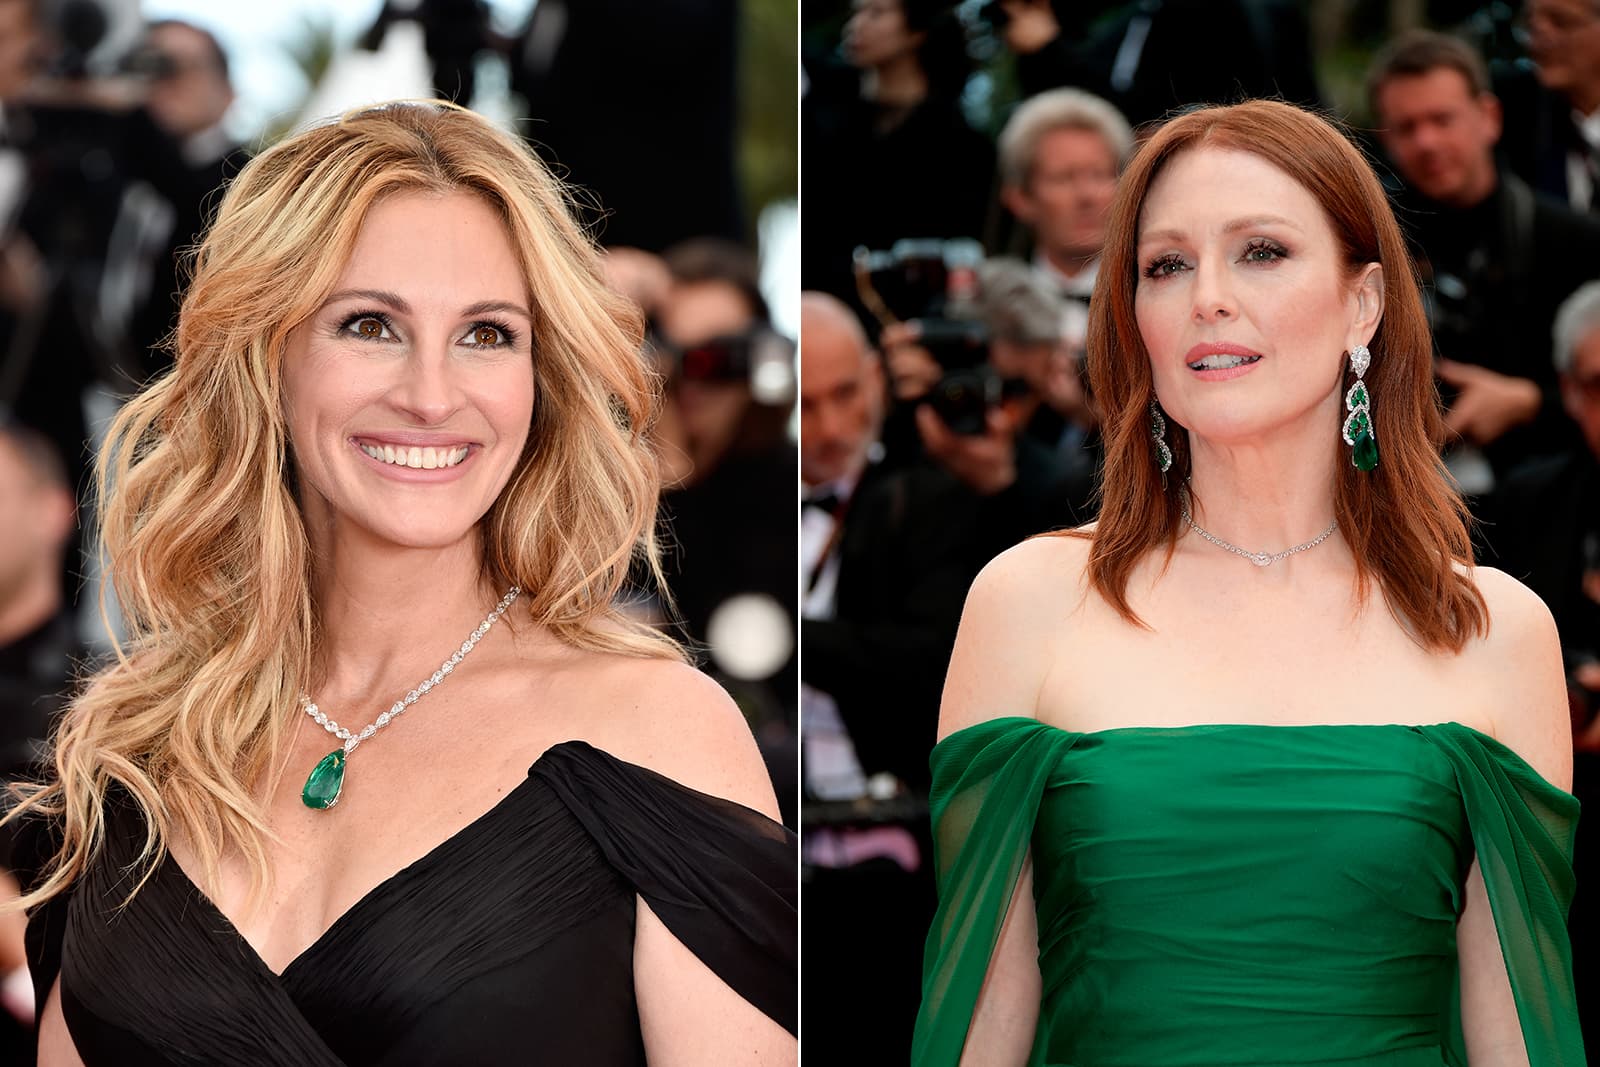 Julia Roberts and Julianne Moore wearing extravagant high jewels on the red carpet at the Cannes Film Festival